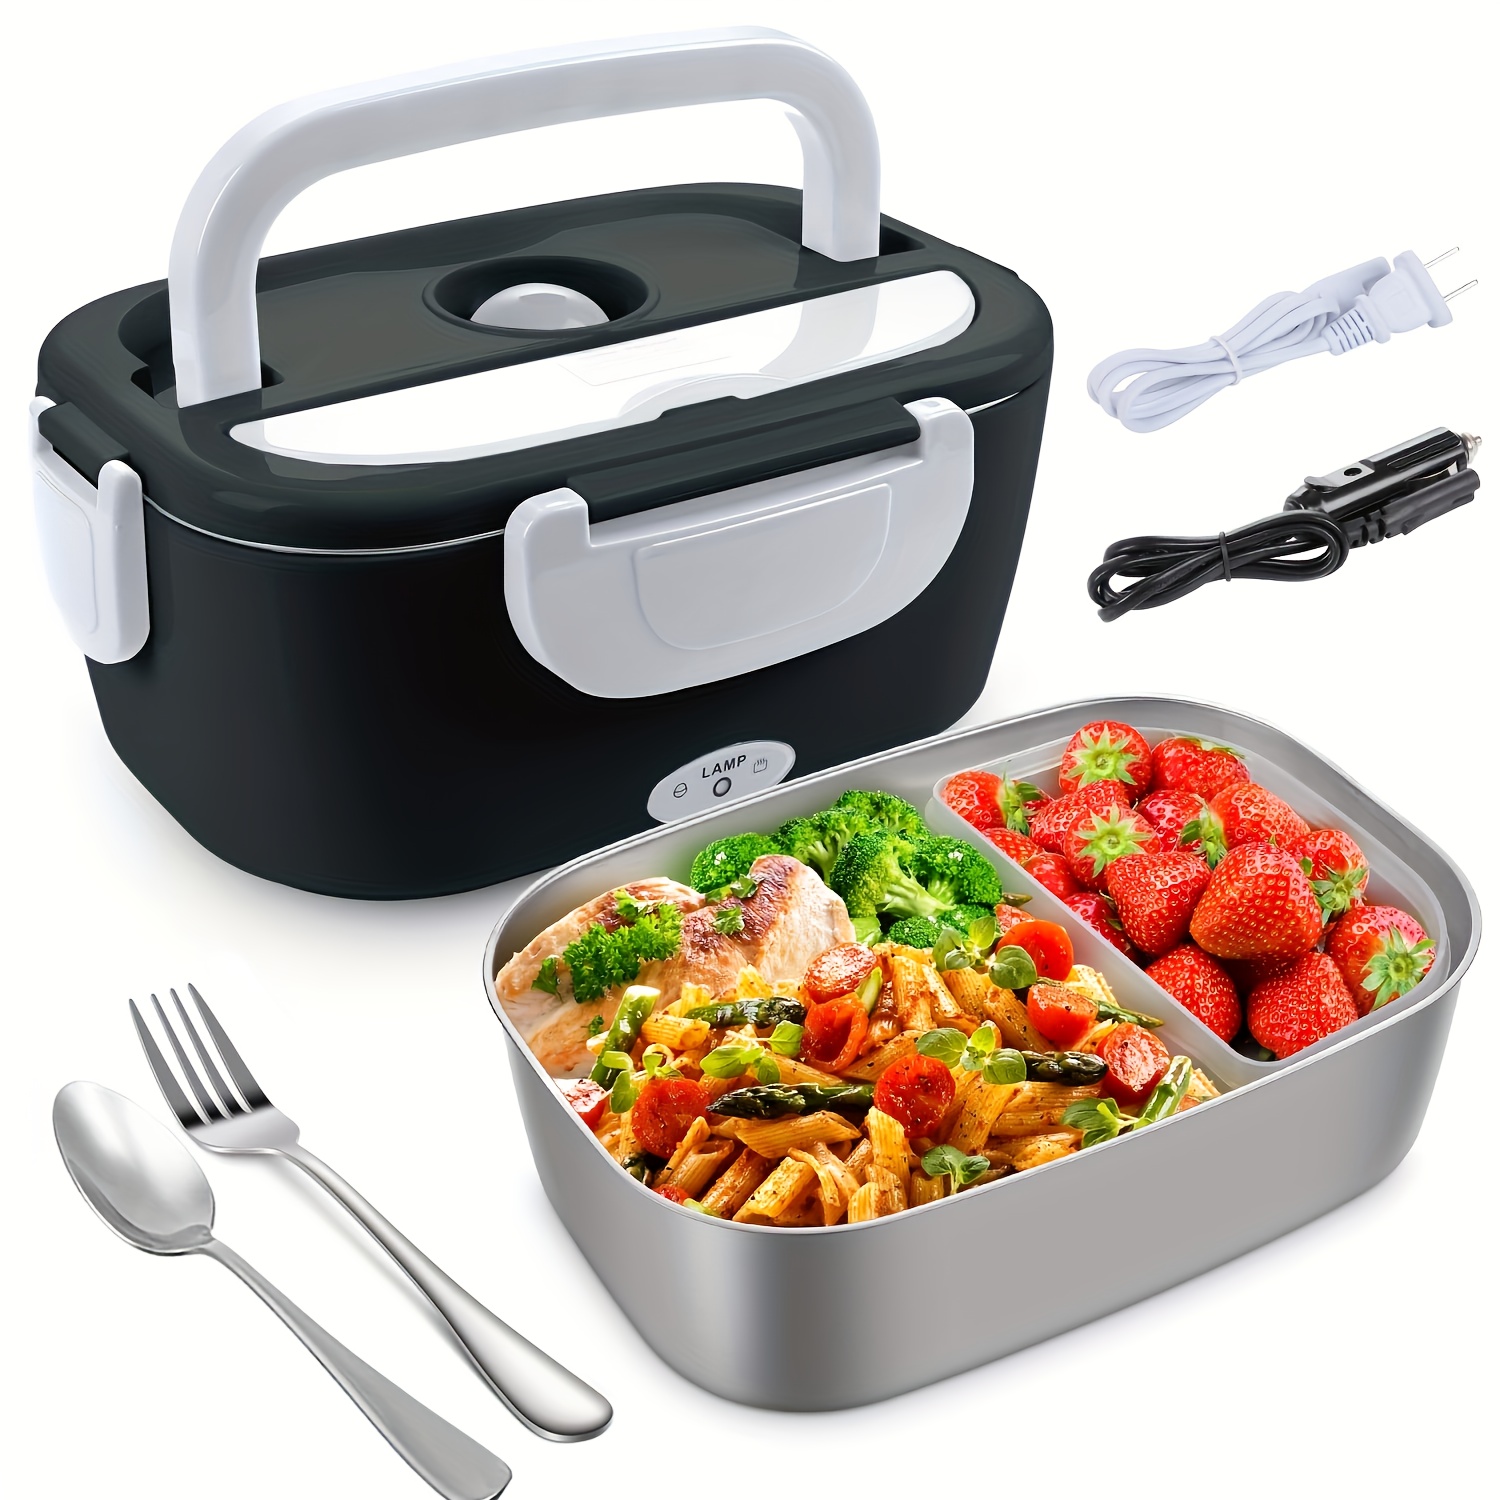 Electric Lunch Box Food Warmer [Upgrade 80W] - Top Kitchen Gadget